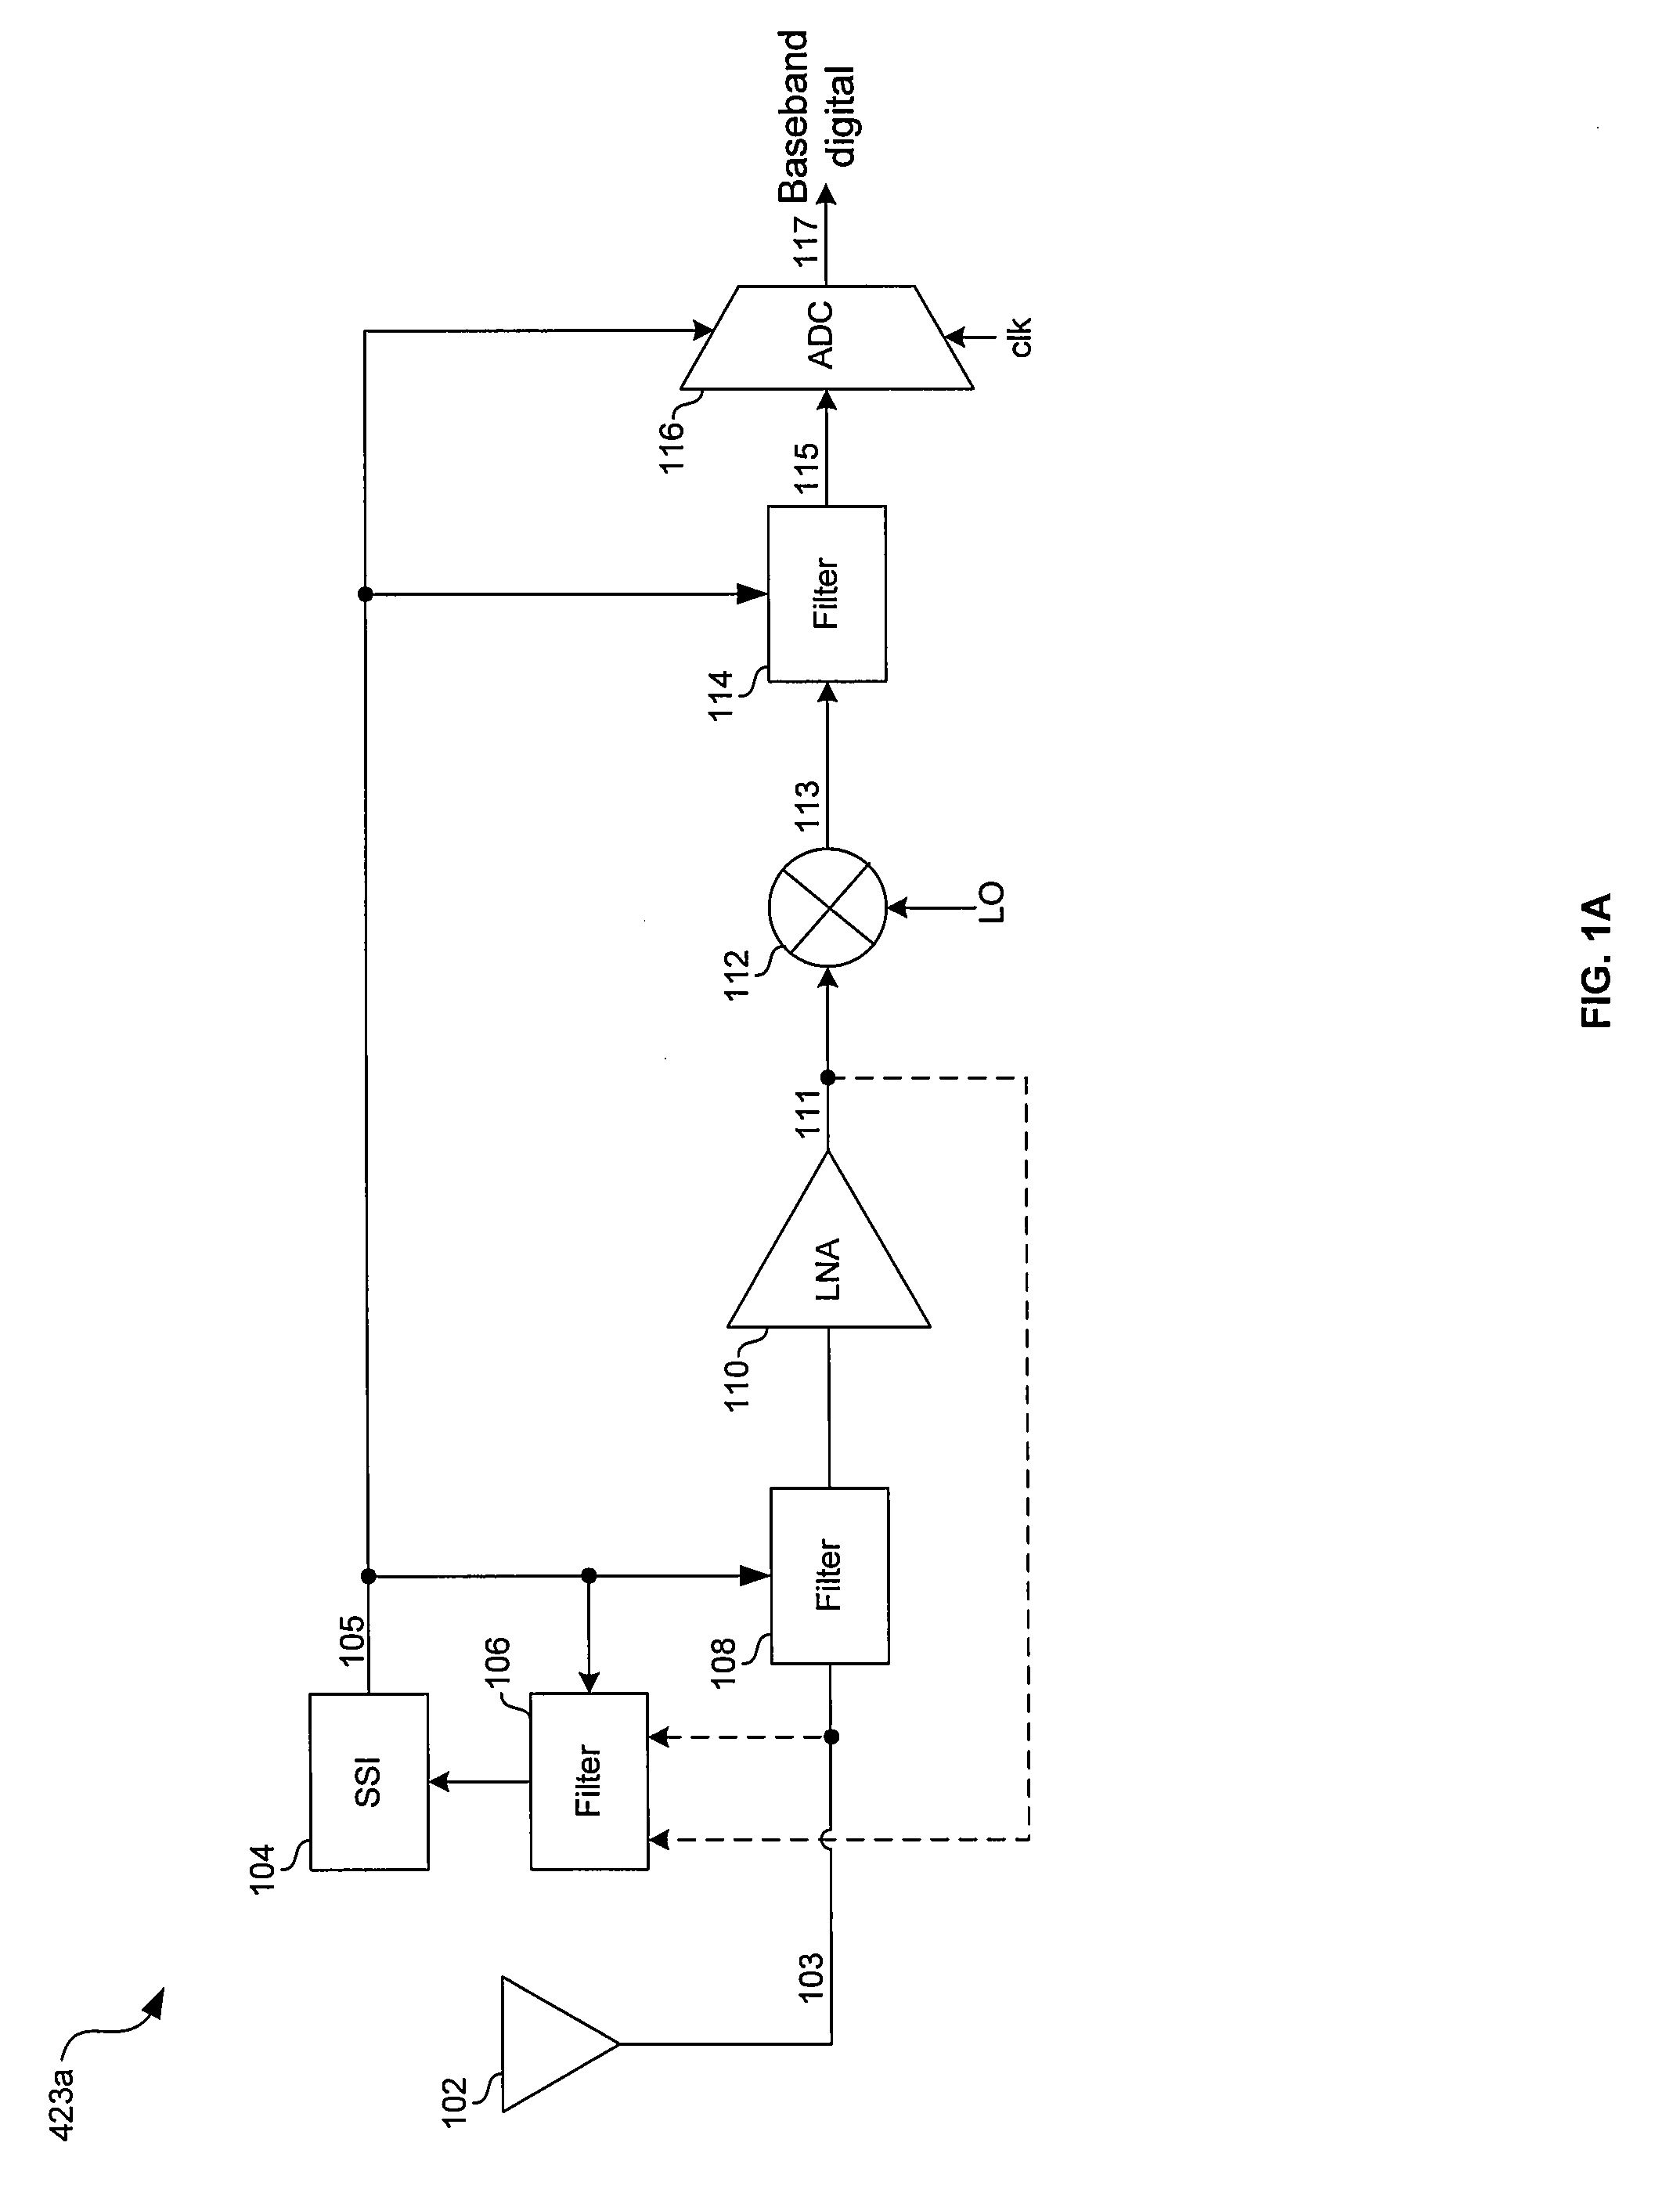 Method and system for dynamic filtering and data conversion resolution adjustments in a receiver